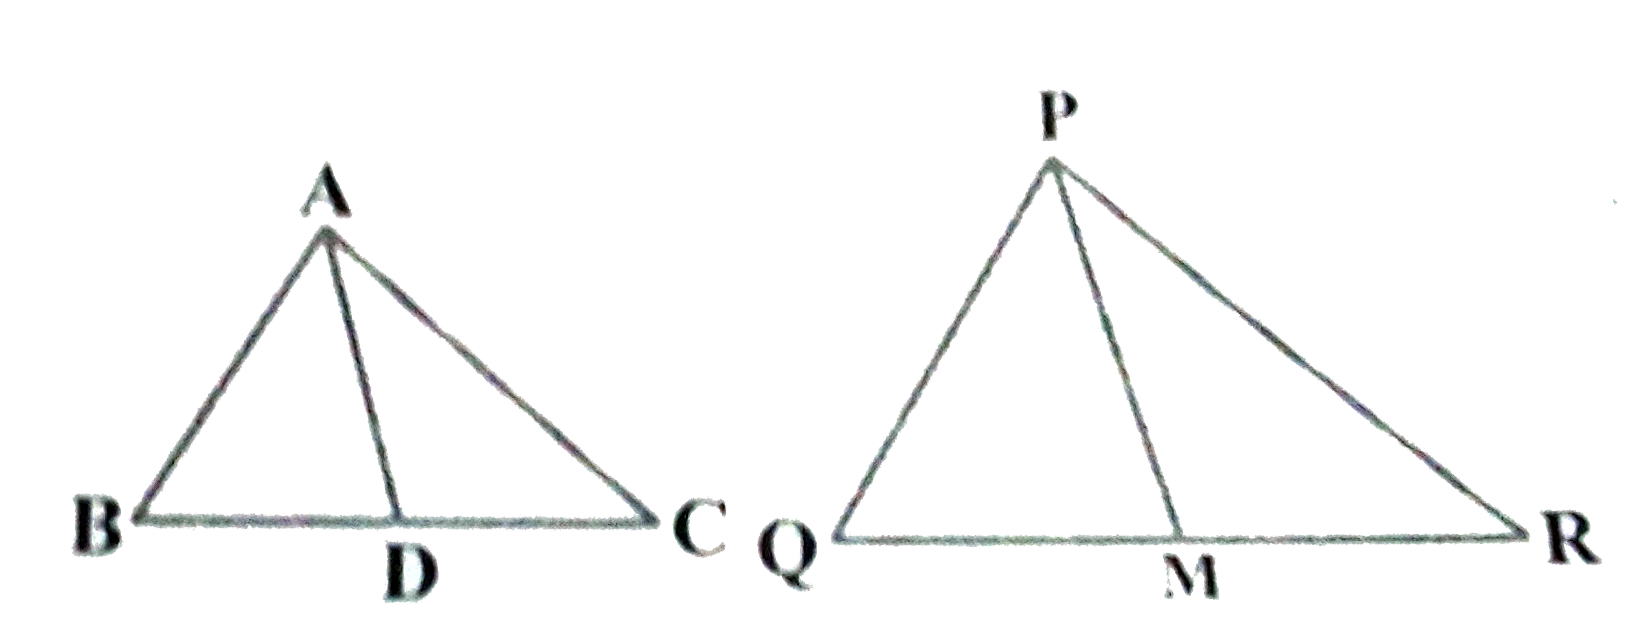 Sides  AB and BC and median AD of a triangle ABC are respectively proportional to  sides PQ and QR and median PM of DeltaP Q R. Show that DeltaA B C~ DeltaP Q R.